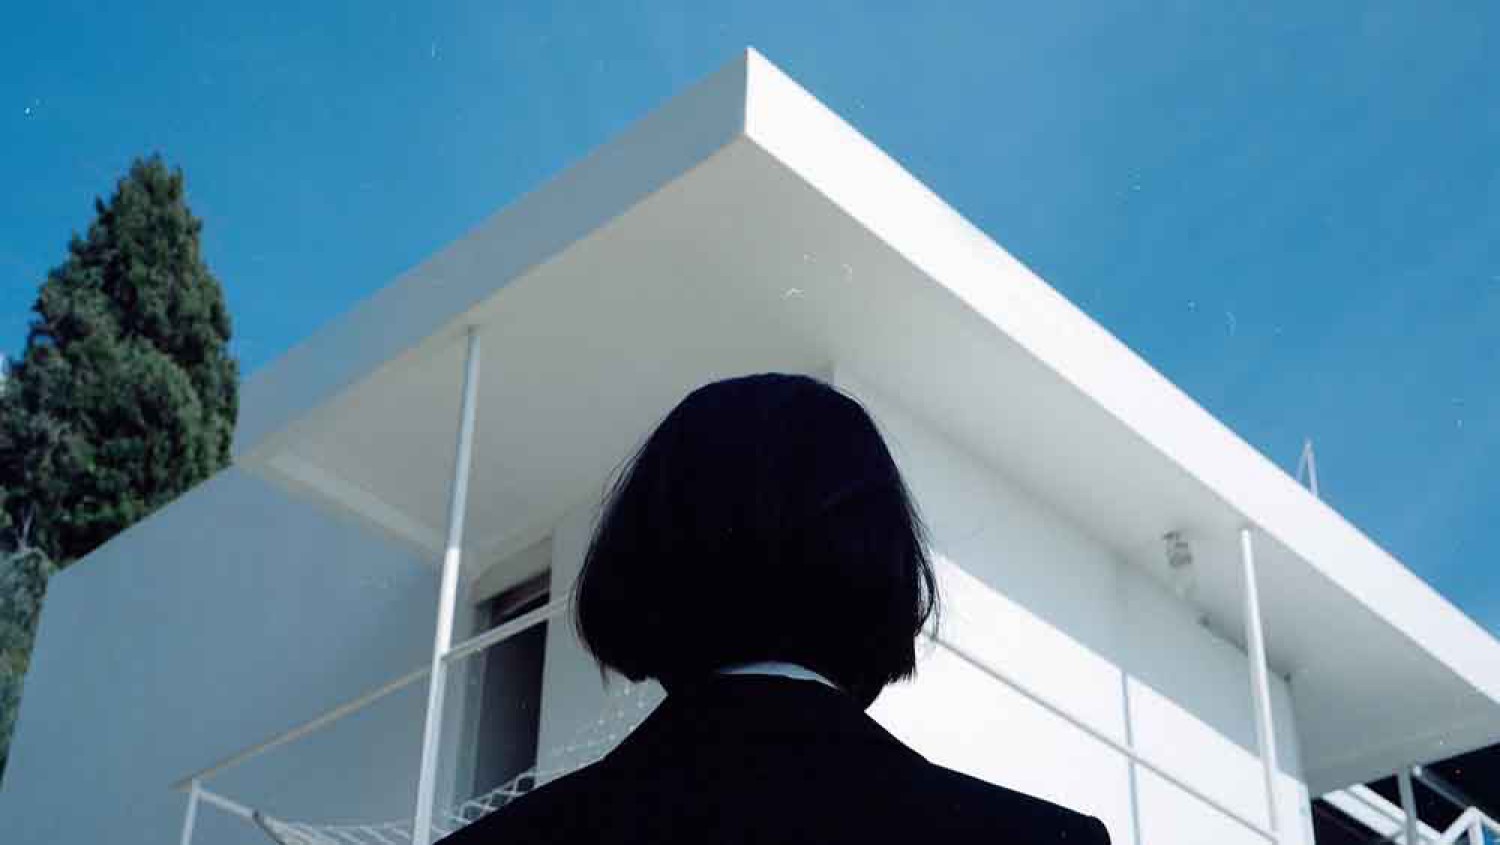 DOK.fest: E.1027 – Eileen Gray and the house by the sea